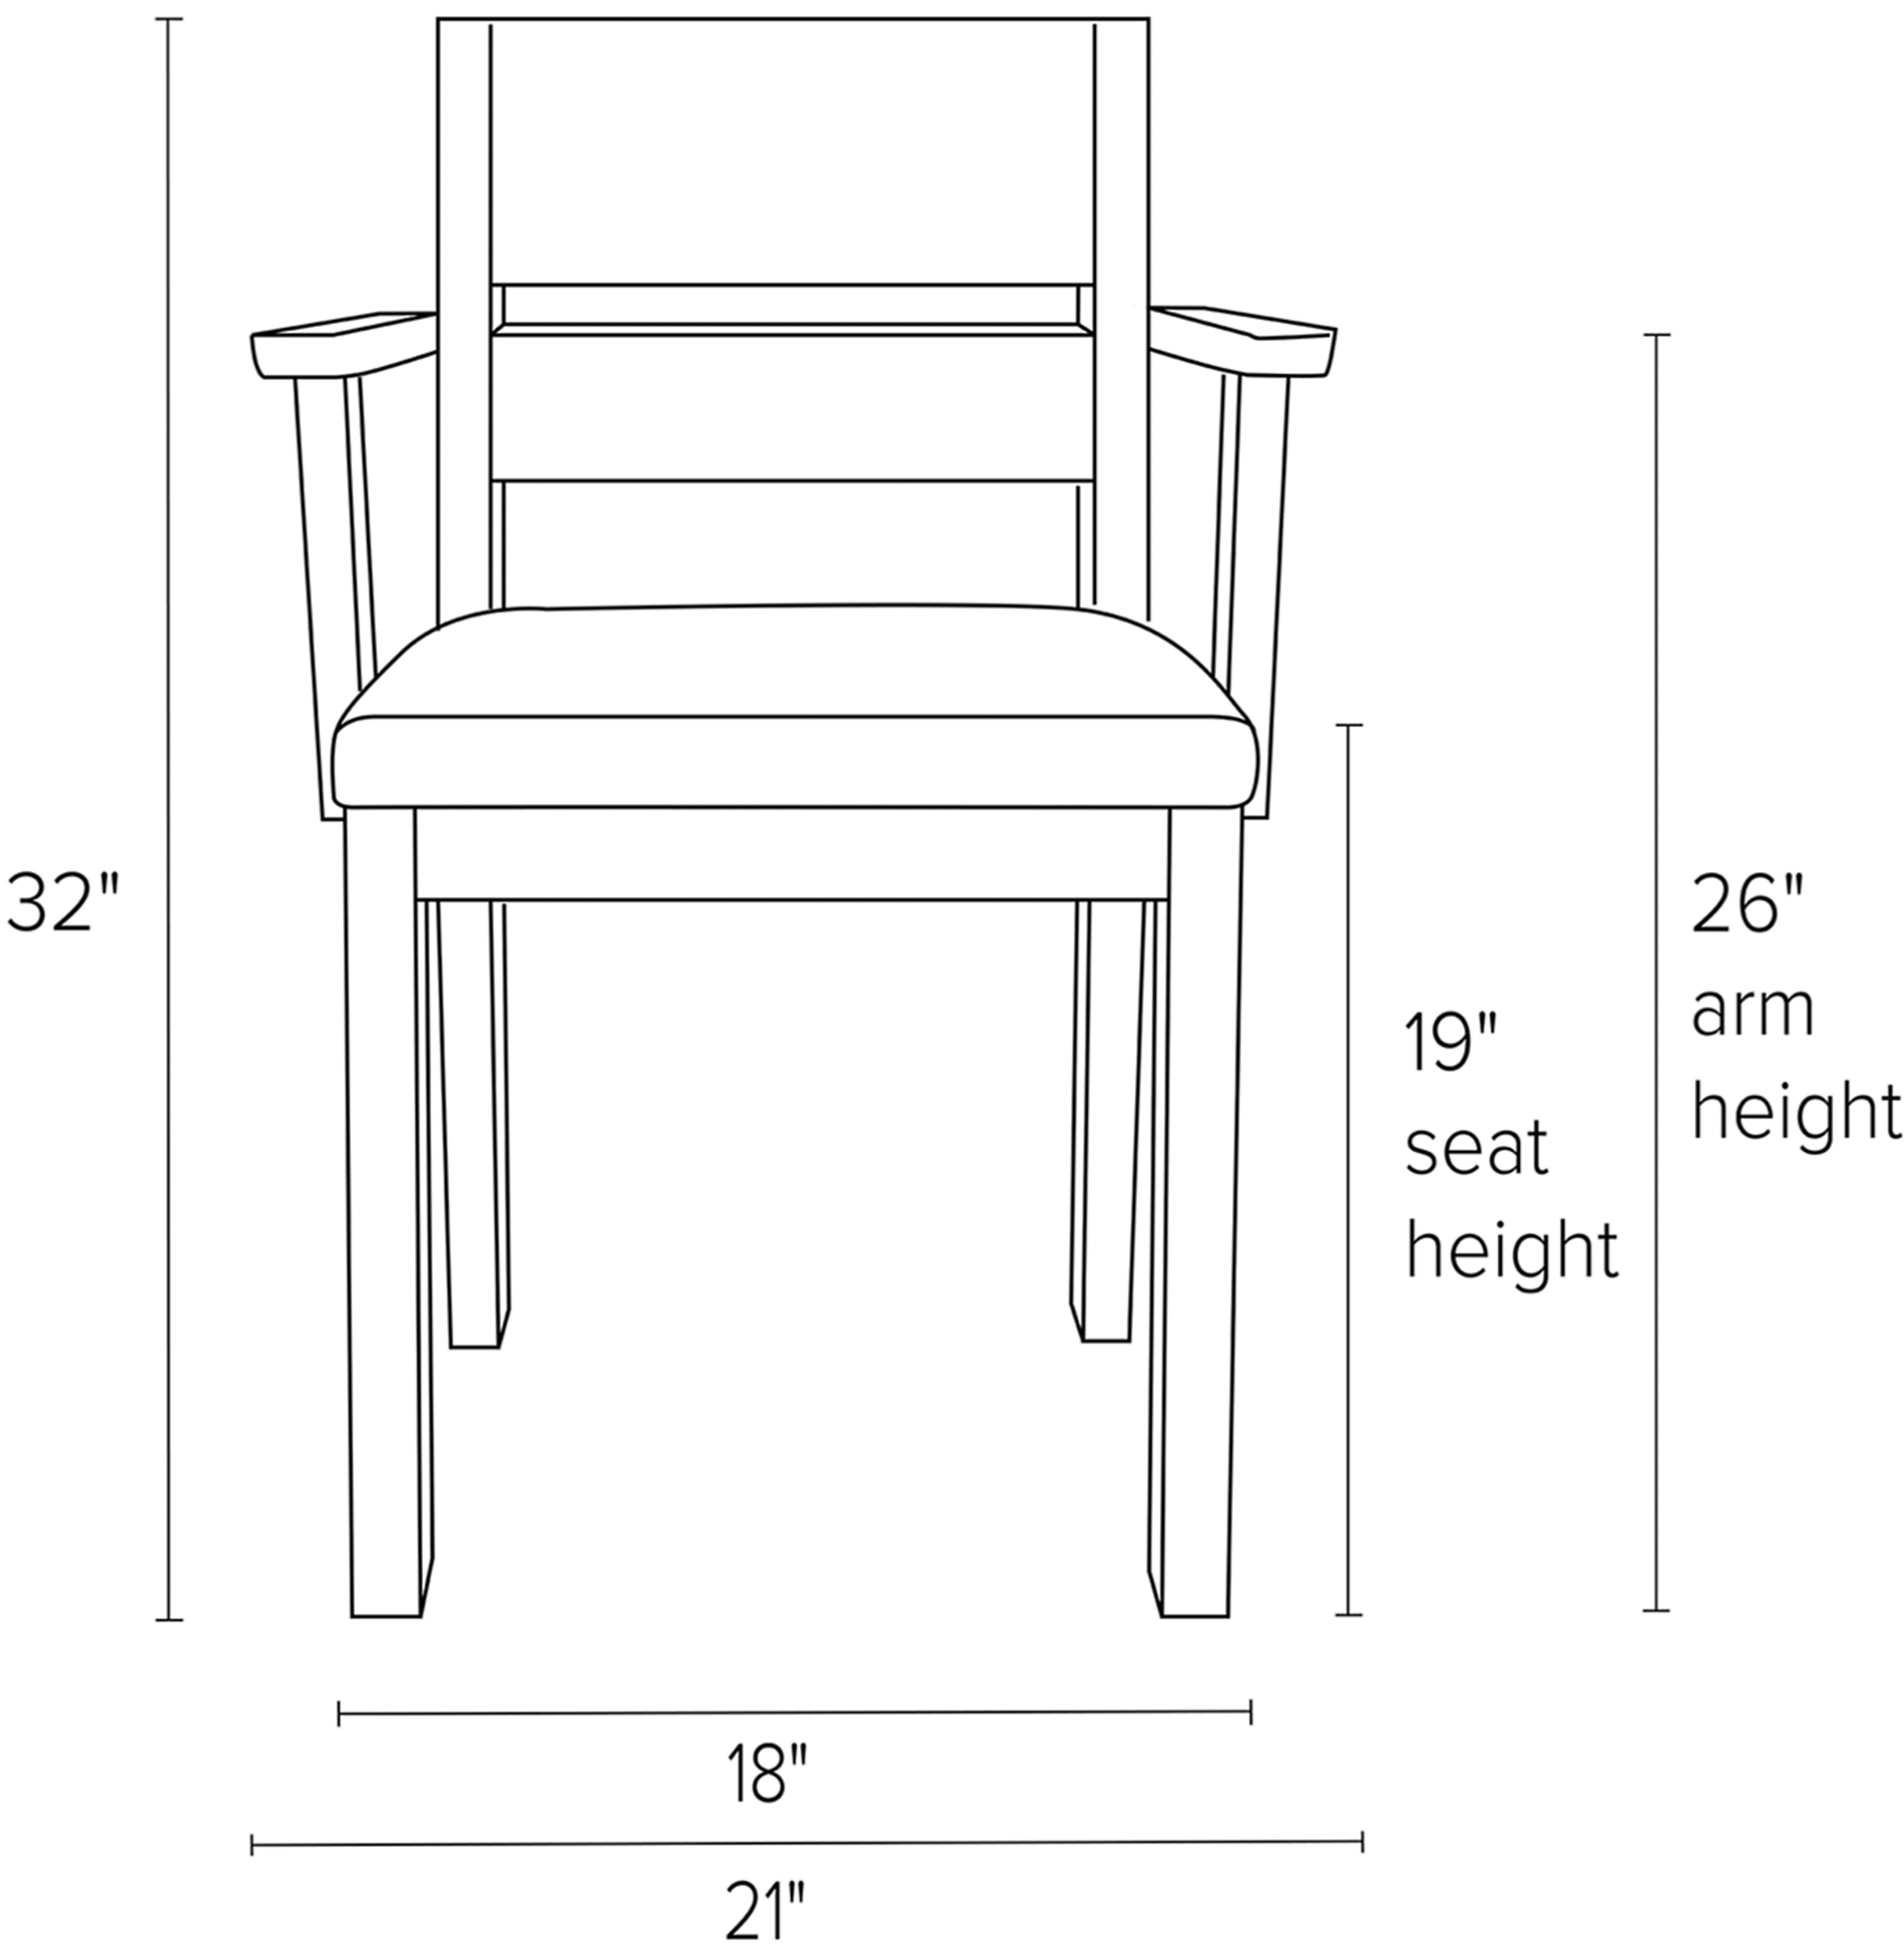 Illustration of Afton arm chair.